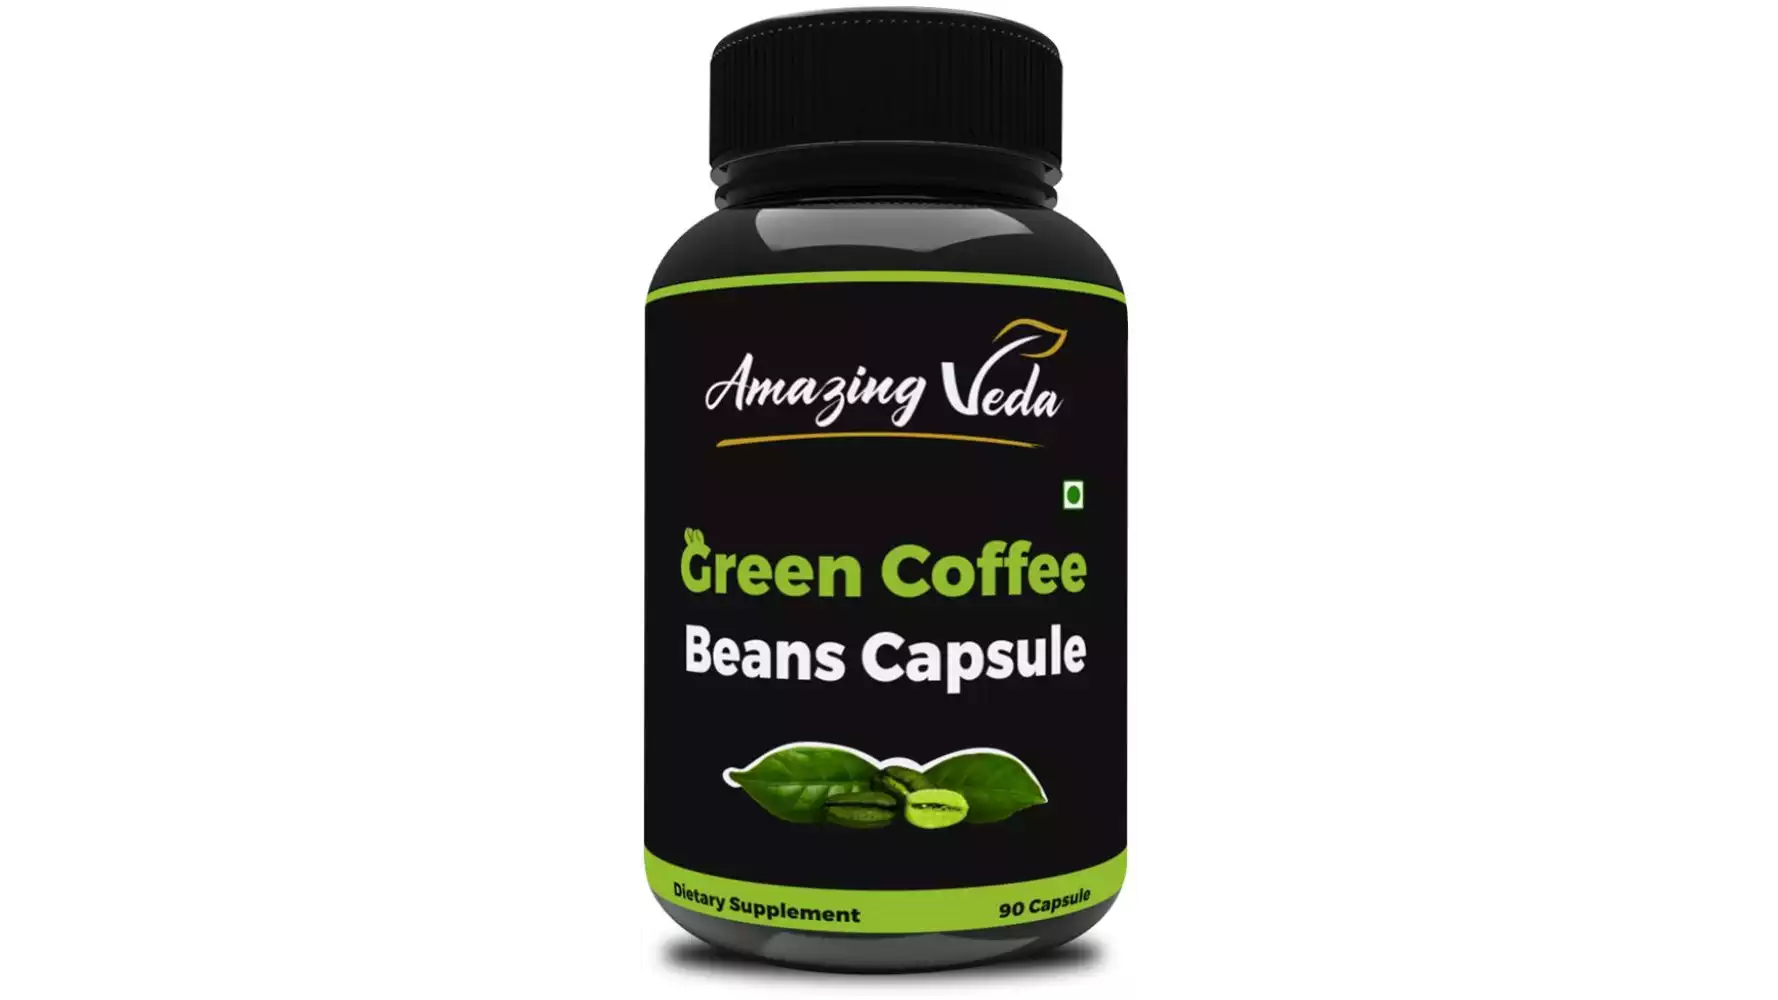 Amazing Veda Green Coffee Beans Weight Loss Capsules (90caps)